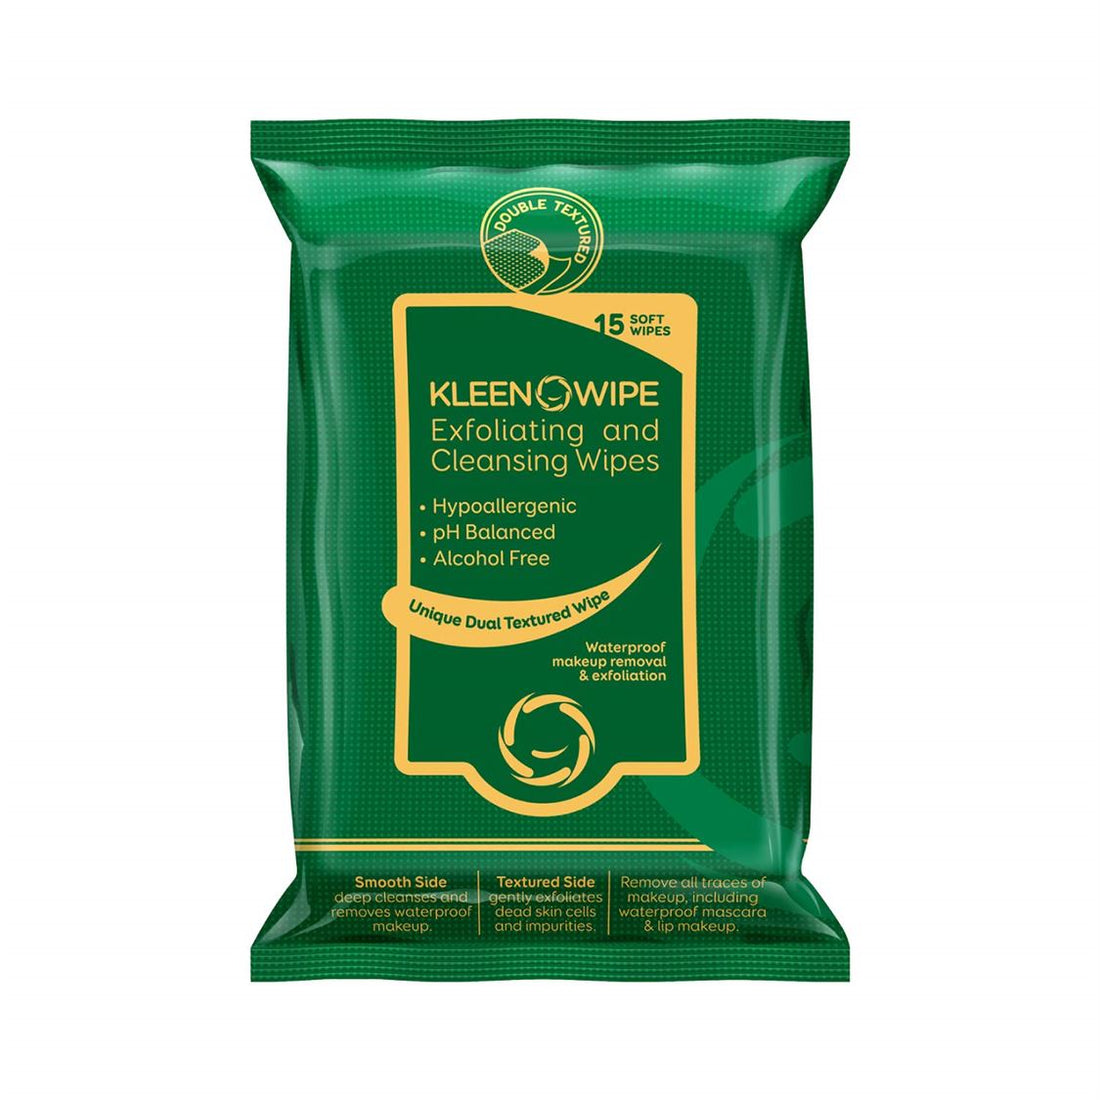 Kleenowipe Exfoliating and Cleansing Wipes 15 Soft Wipes